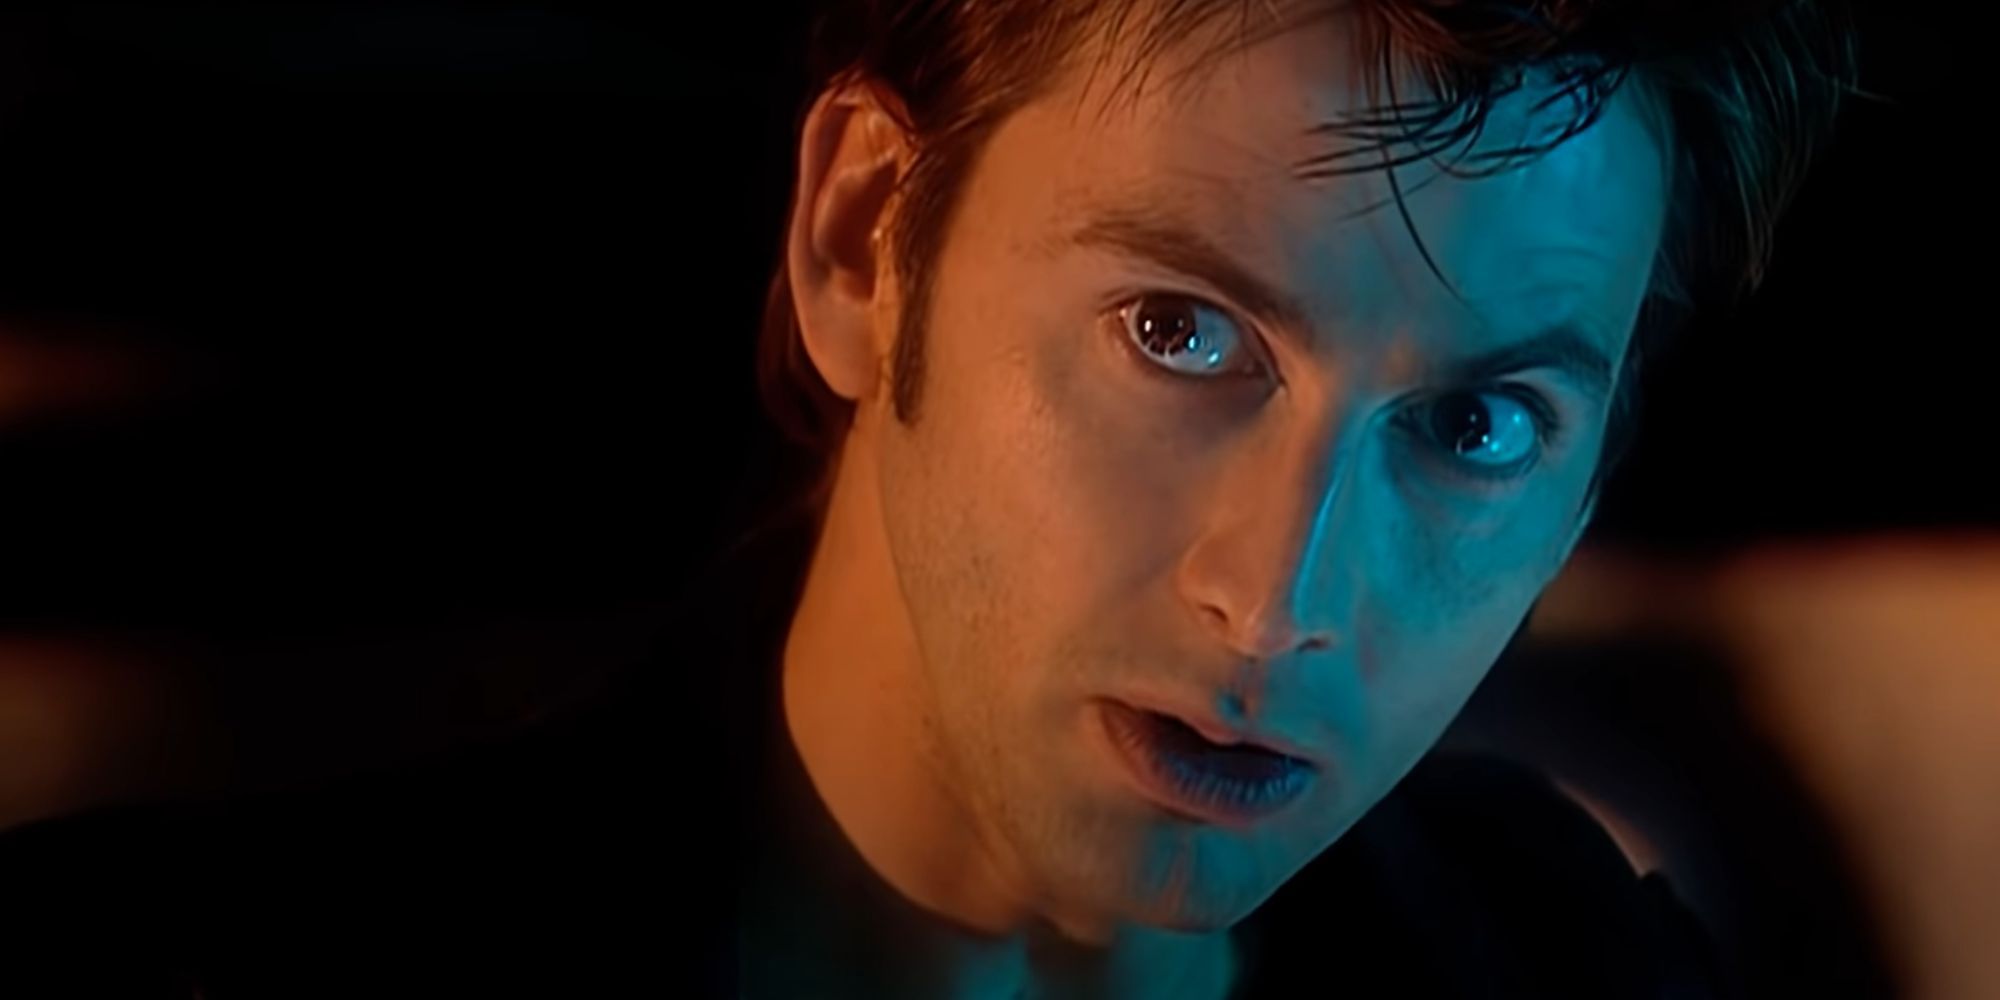 David Tennant as the Tenth Doctor in the 2005 Children In Need special looking thoughtful